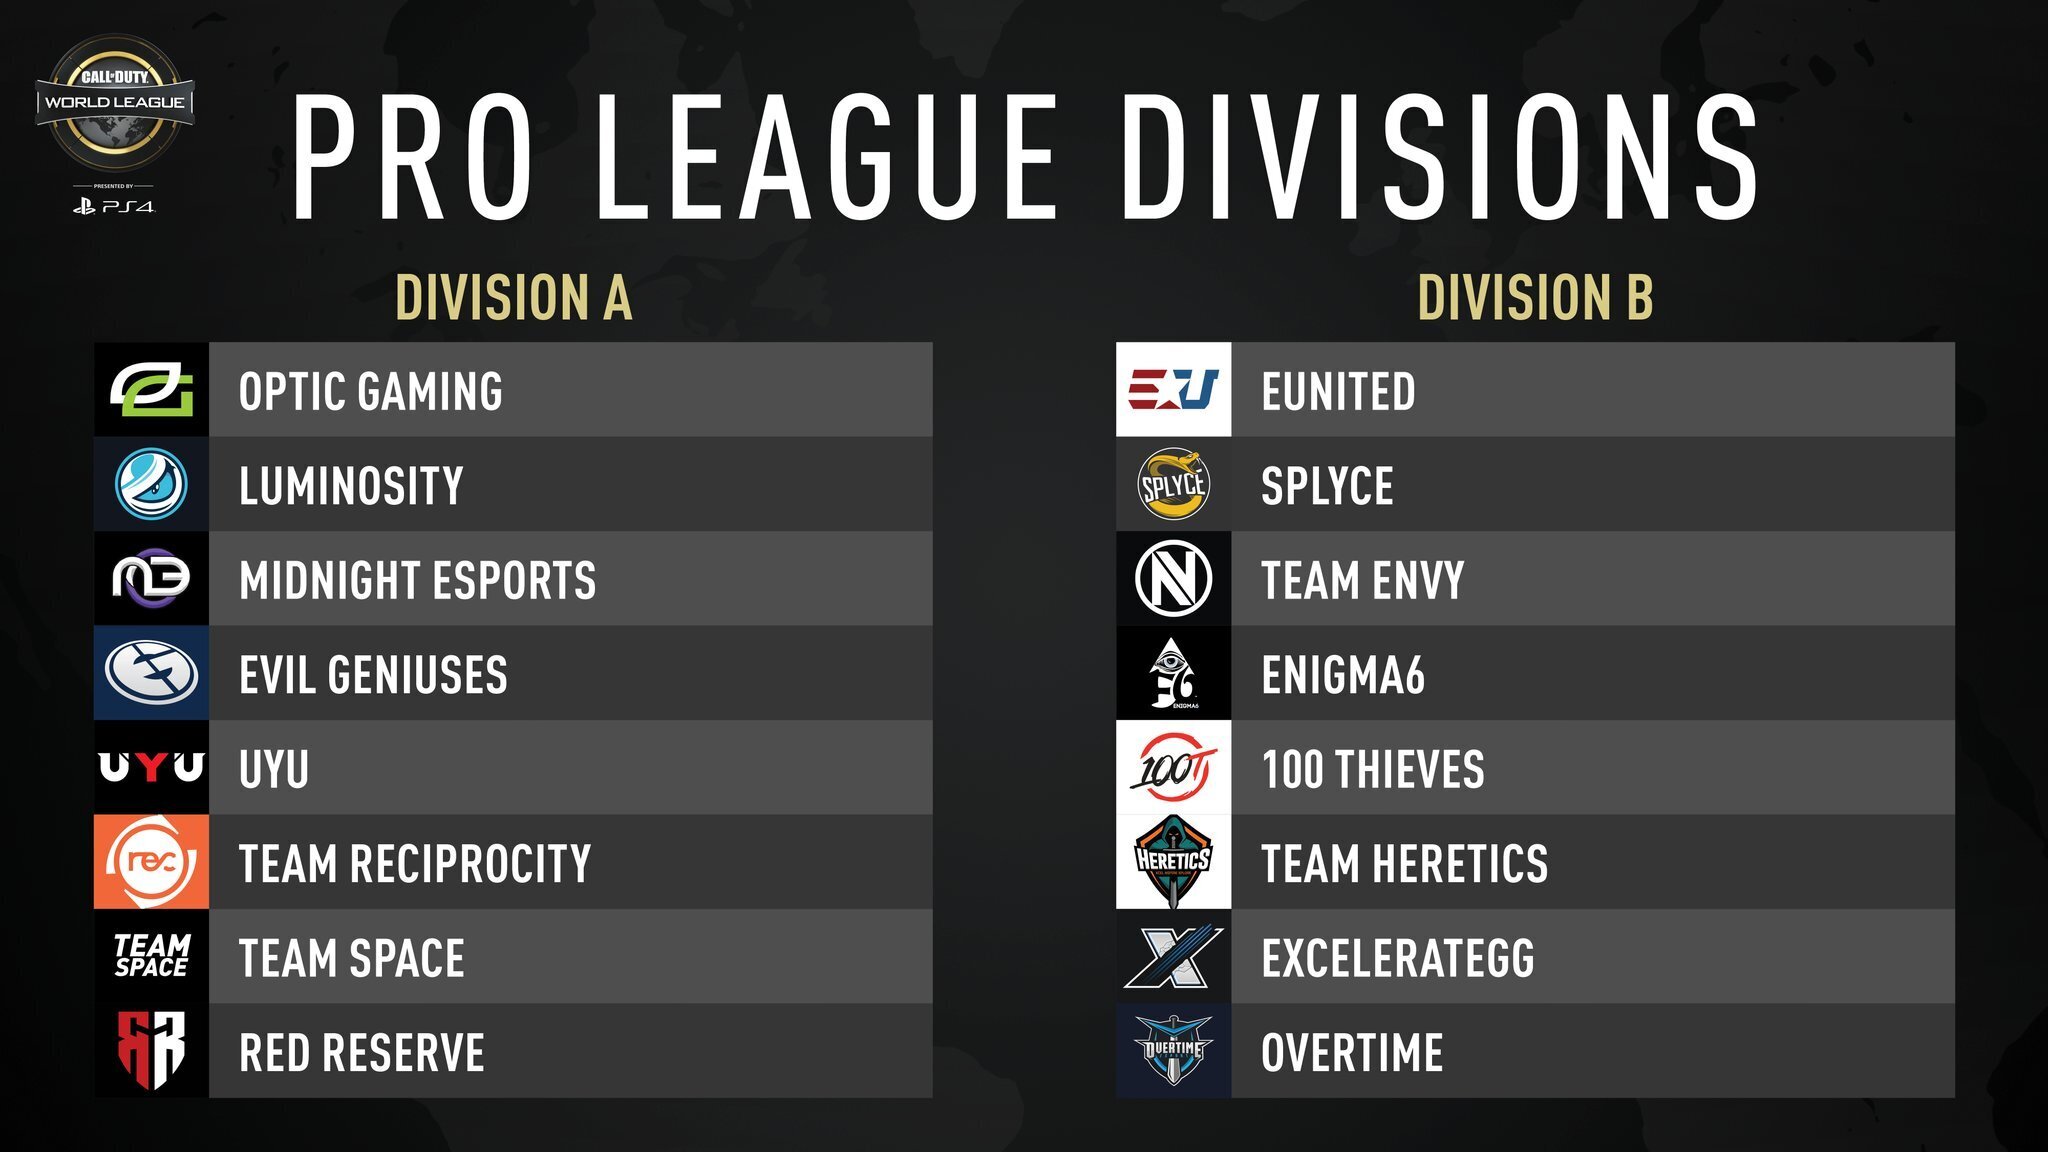 Excelerate Gaming, Team Space, Red Reserve and Overtime eSport were the four final teams to qualify today for the 2019 CWL Global Pro League.